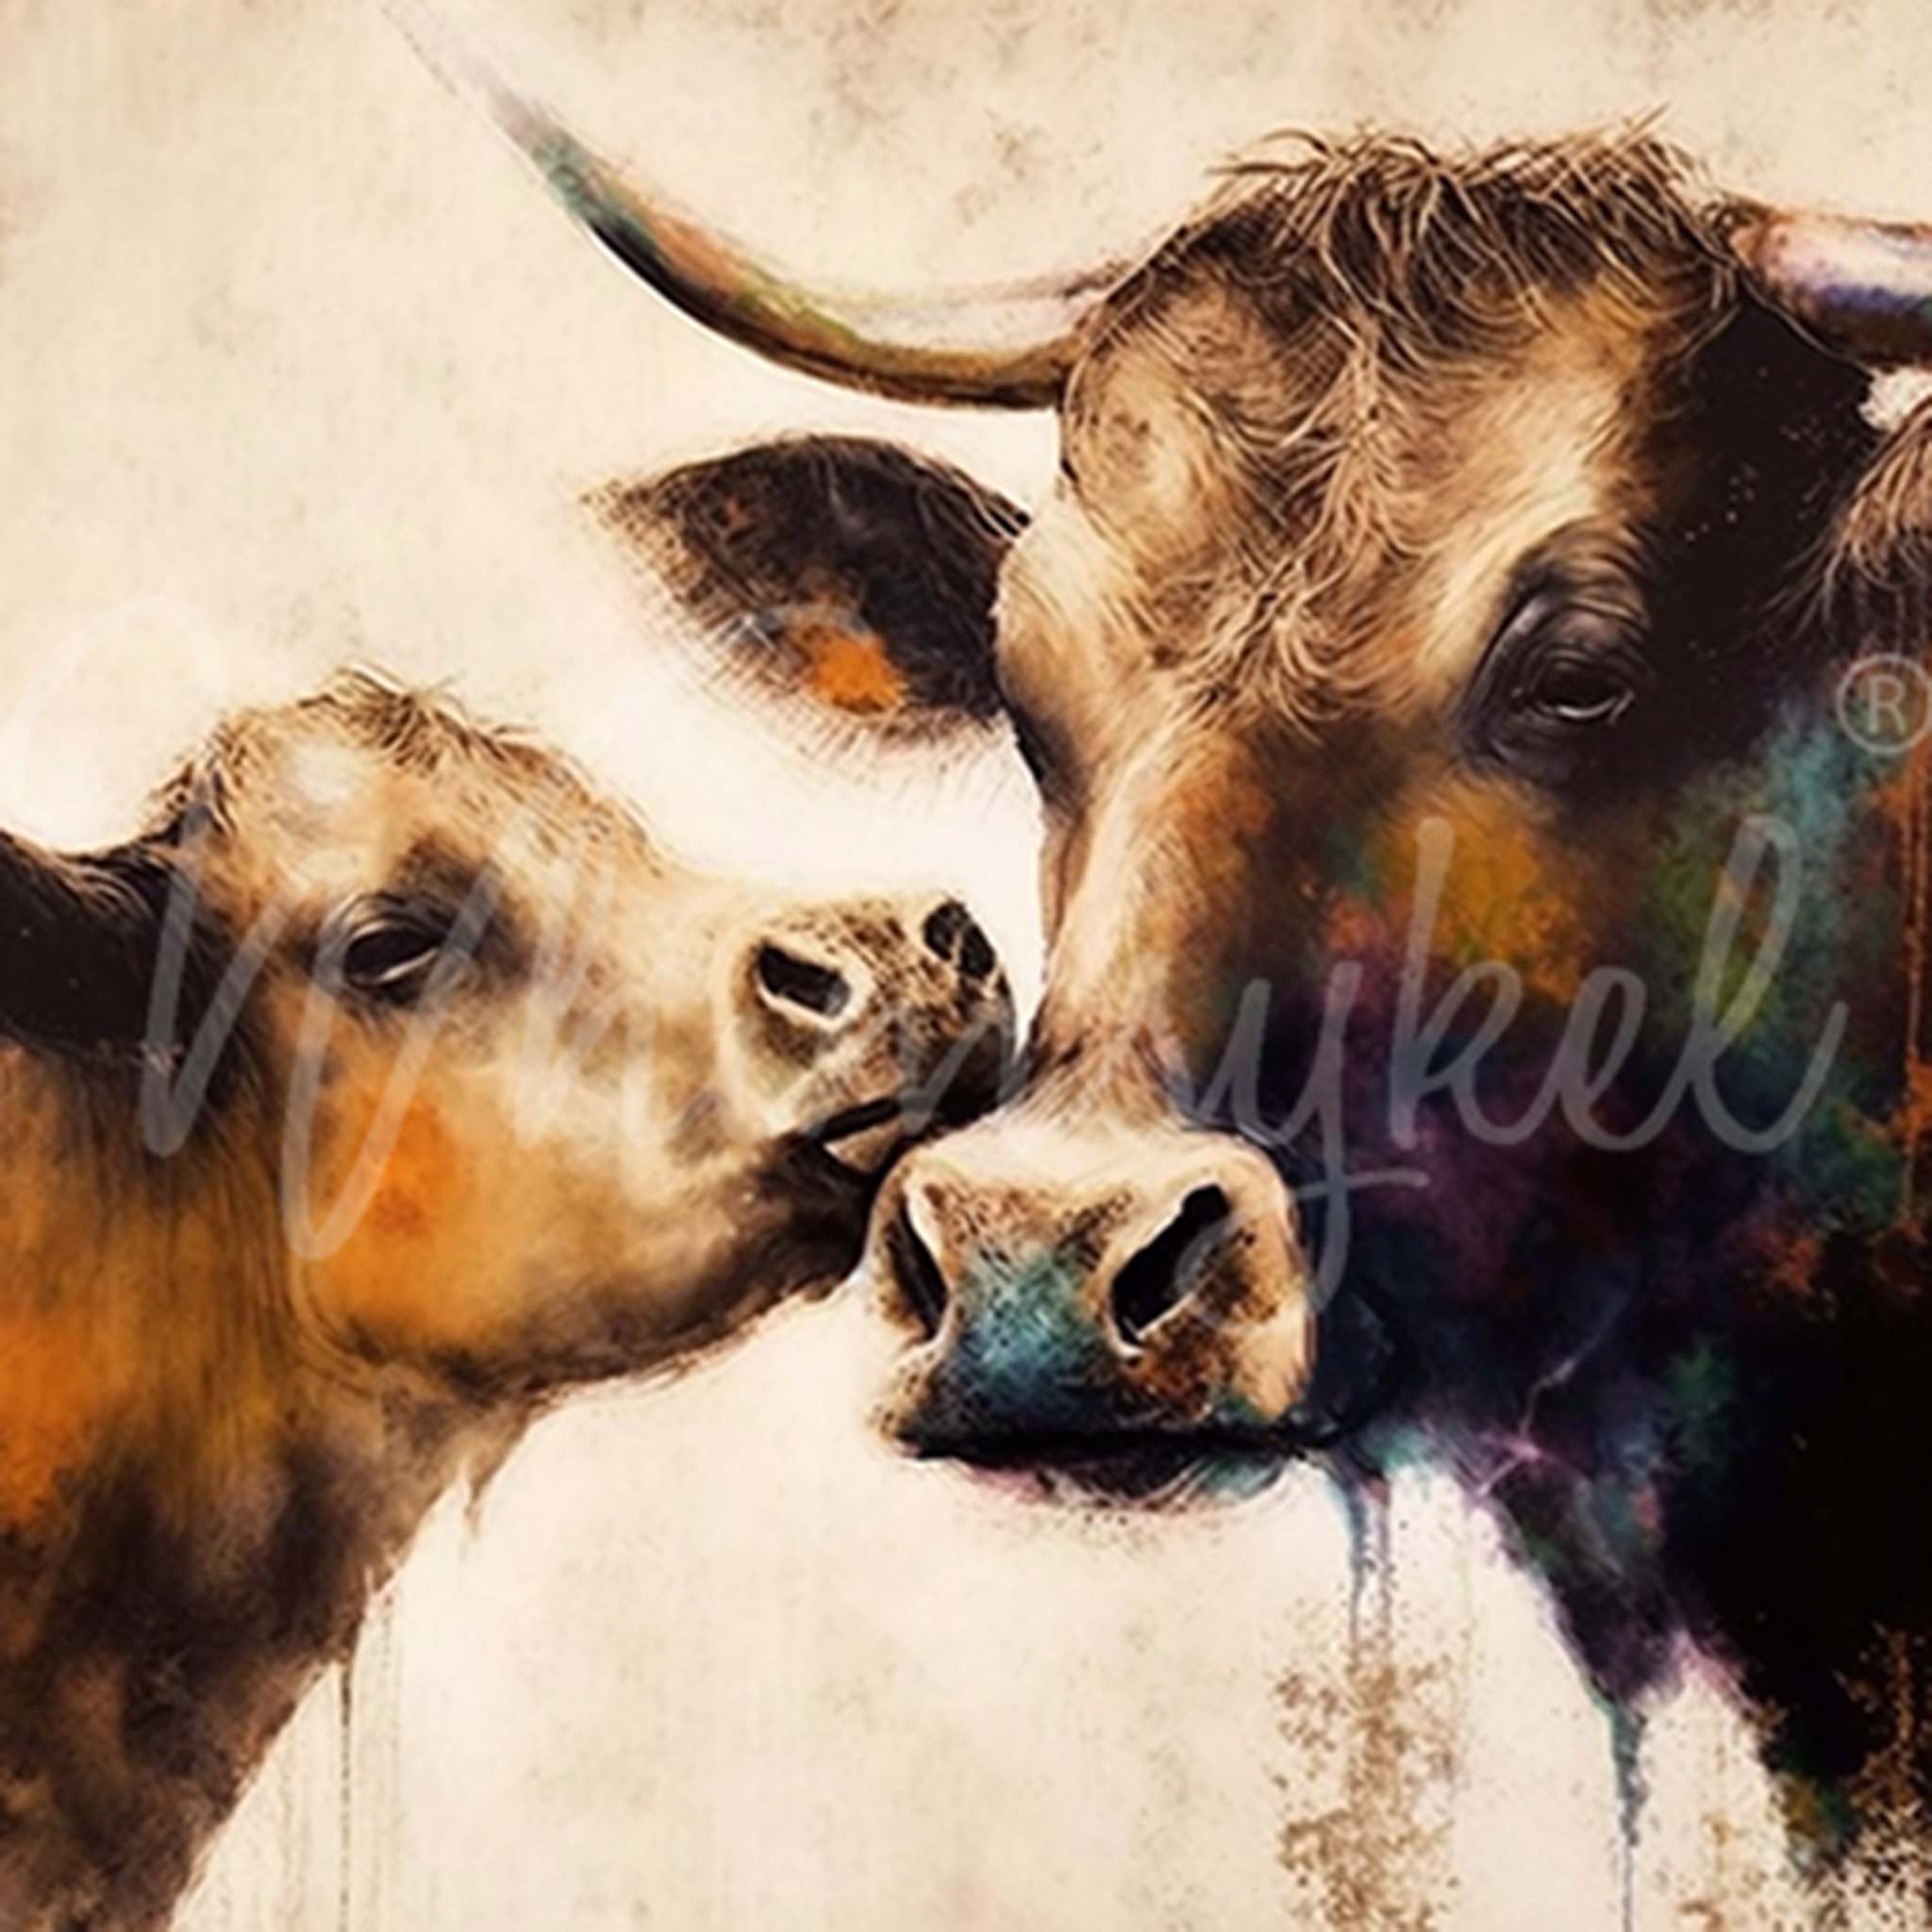 Close-up of a tissue paper design that features a painting capturing the bond between a calf and cow.